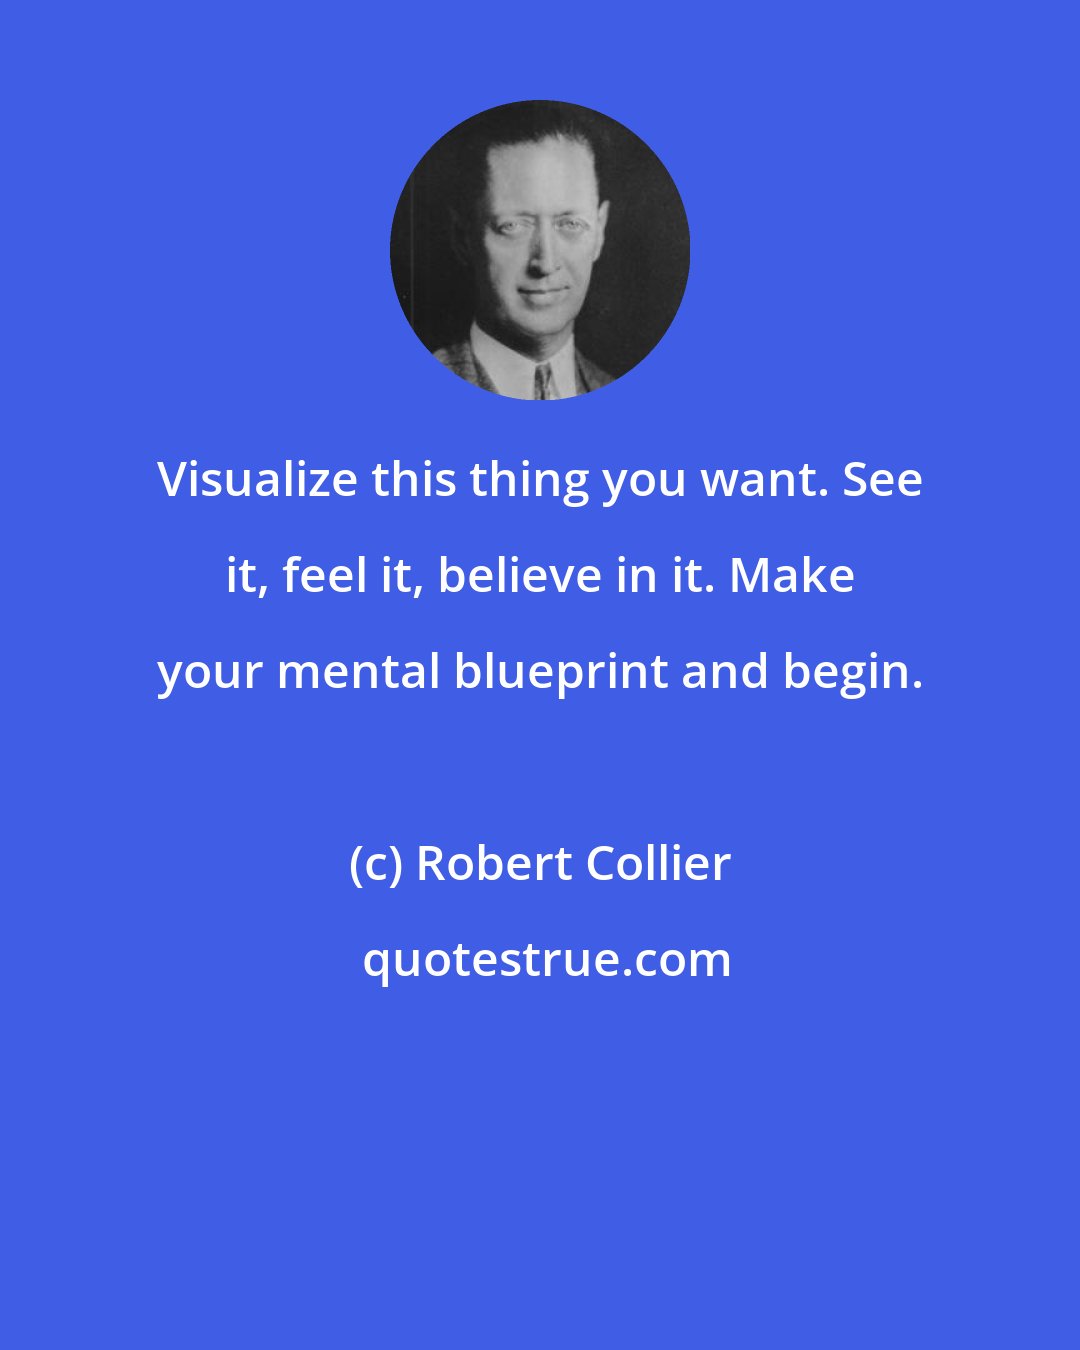 Robert Collier: Visualize this thing you want. See it, feel it, believe in it. Make your mental blueprint and begin.